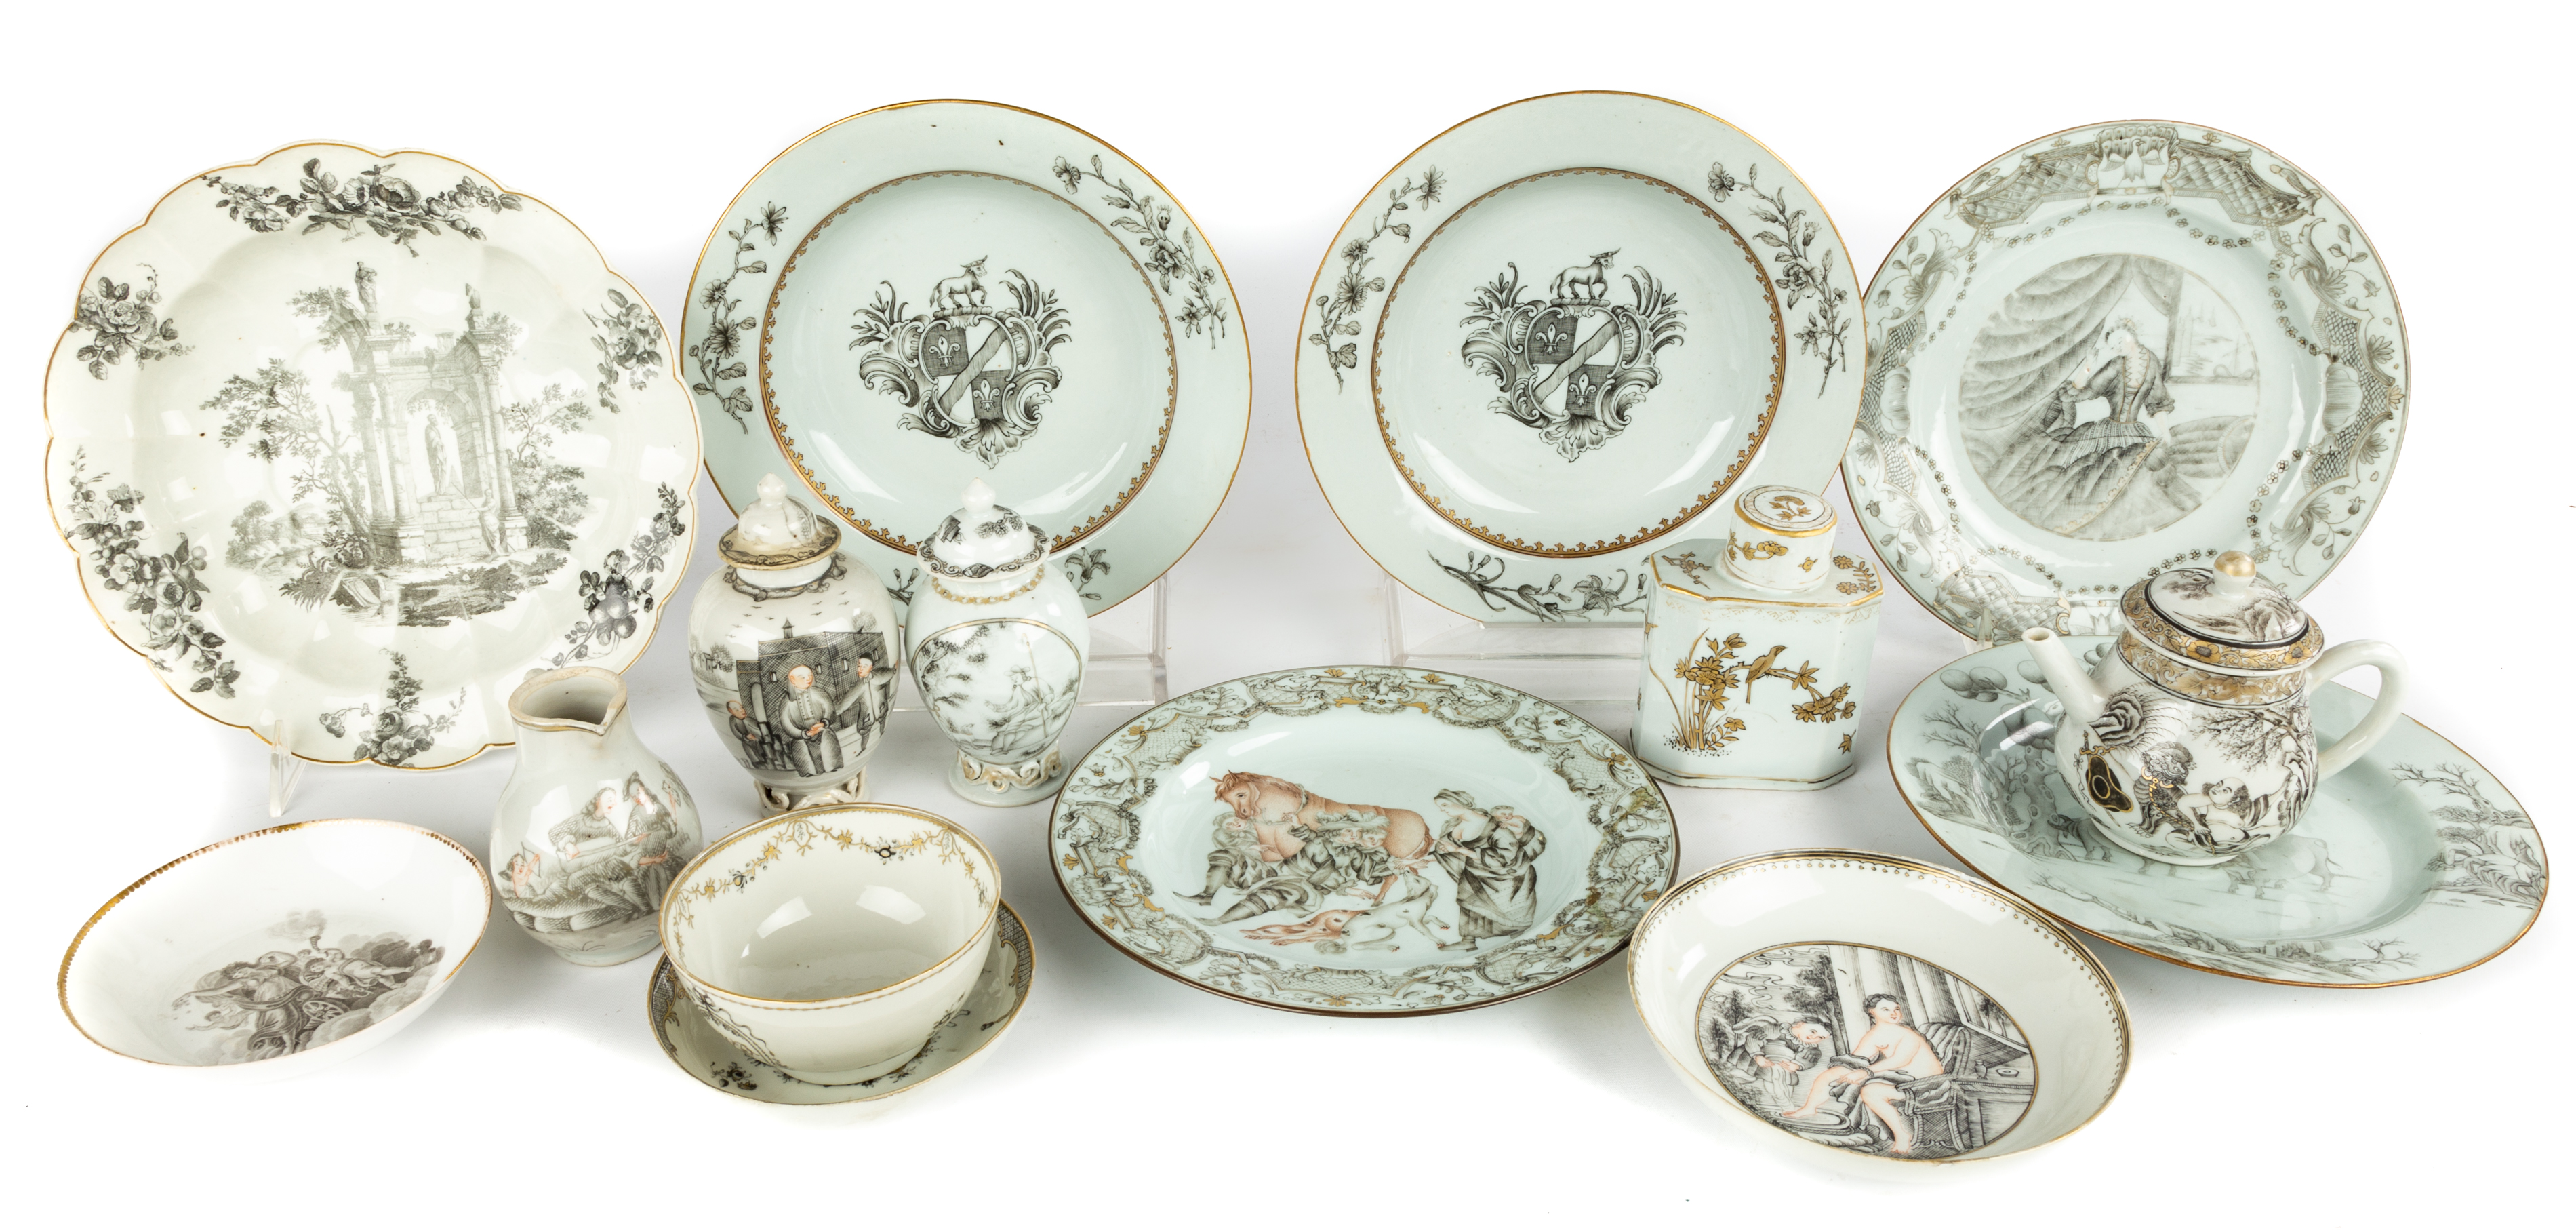 GROUP OF CHINESE EXPORT PORCELAIN